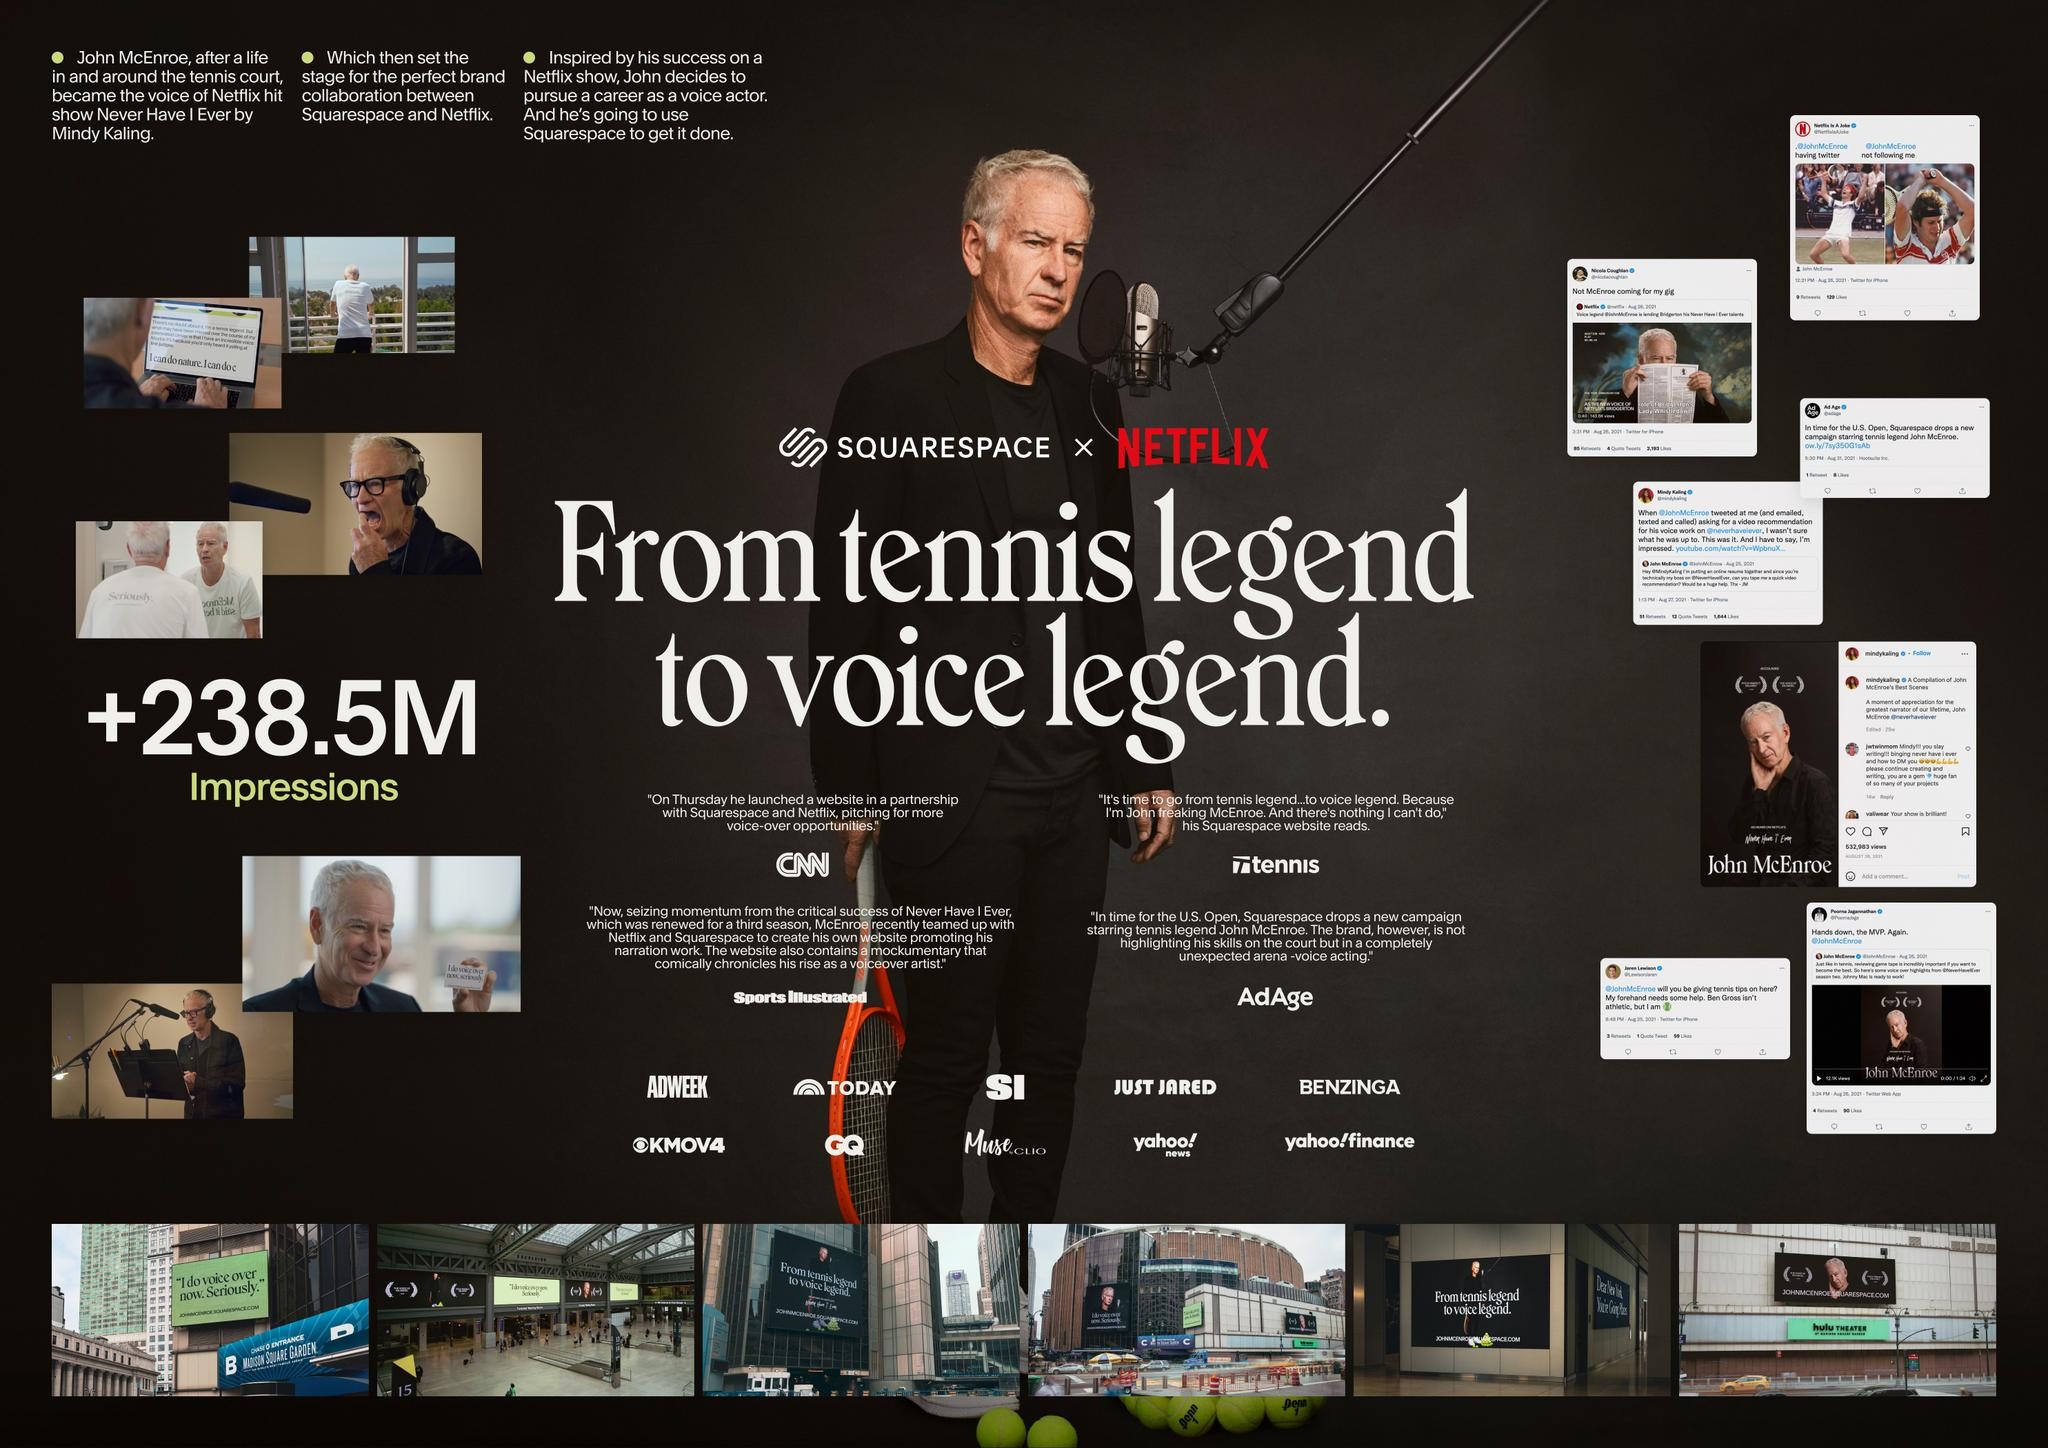 From Tennis Legend to Voice Legend: A Film by John McEnroe